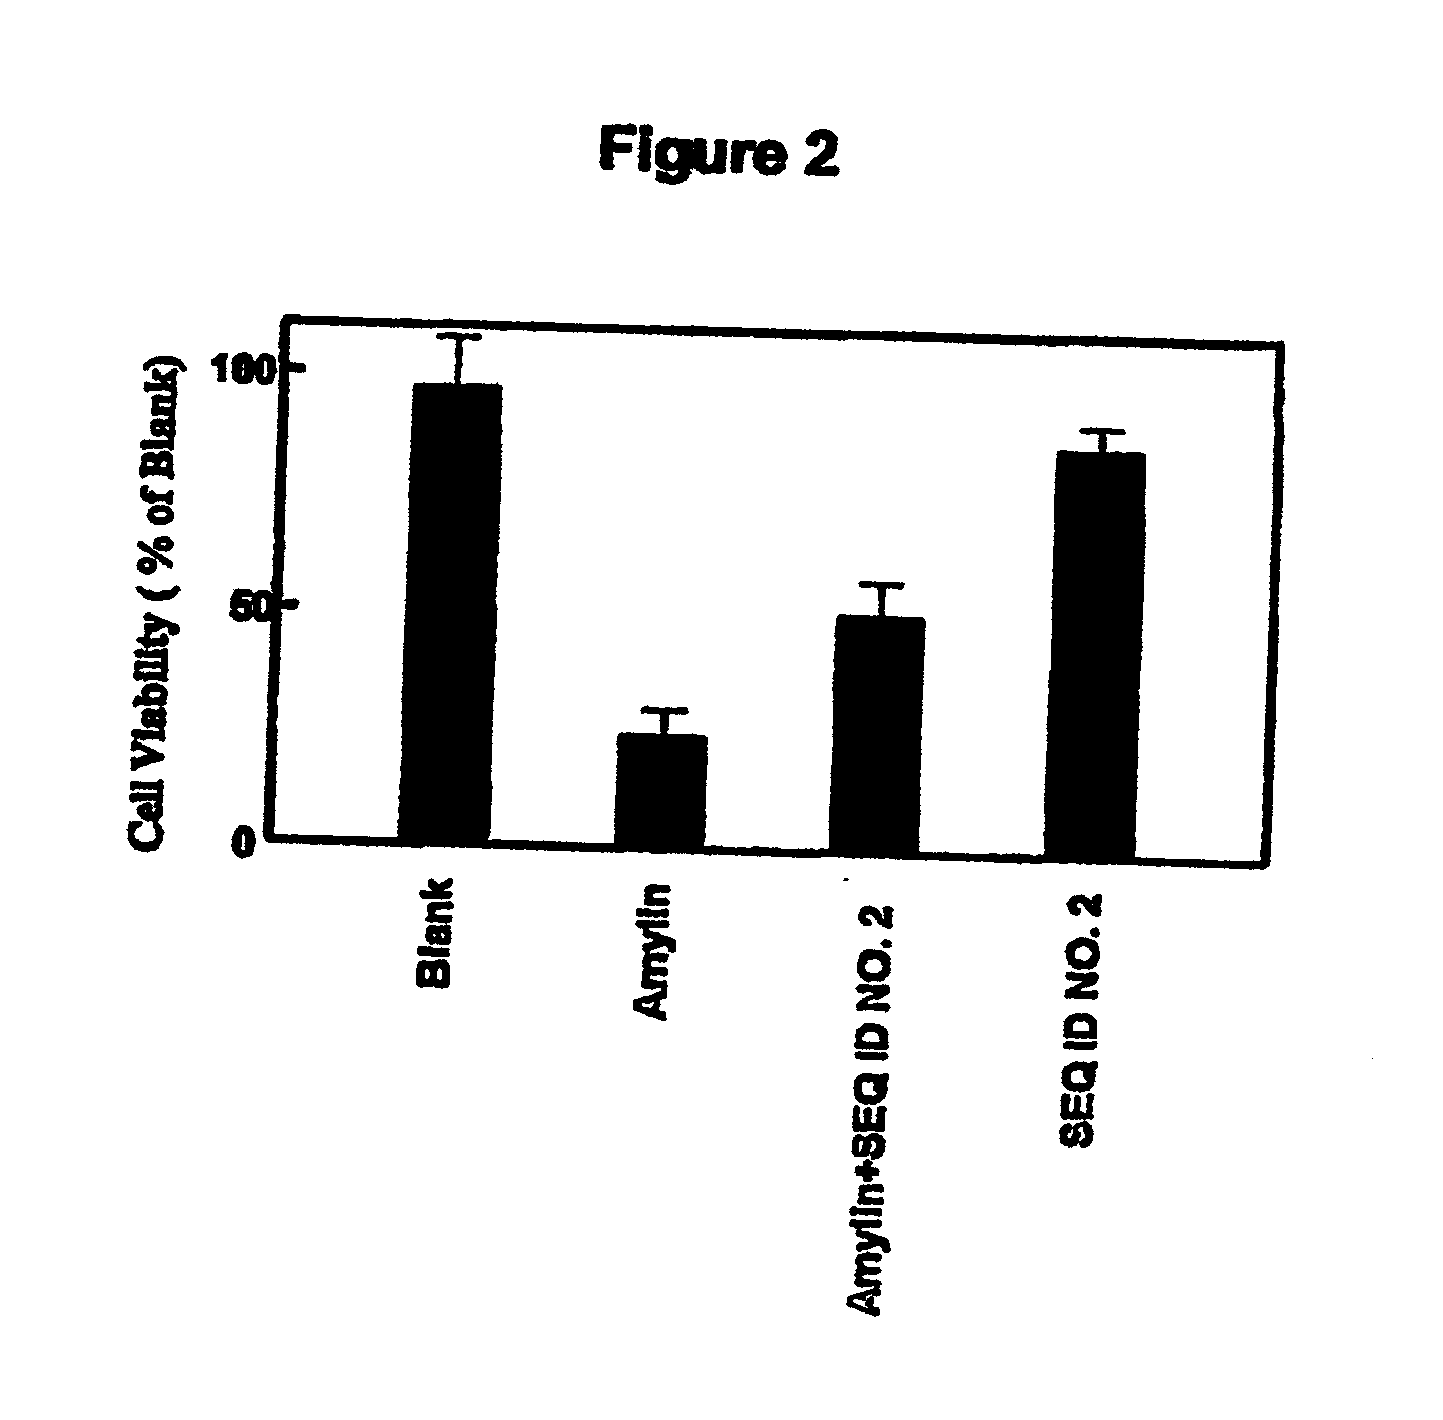 Amylin aggregation inhibitors and use thereof